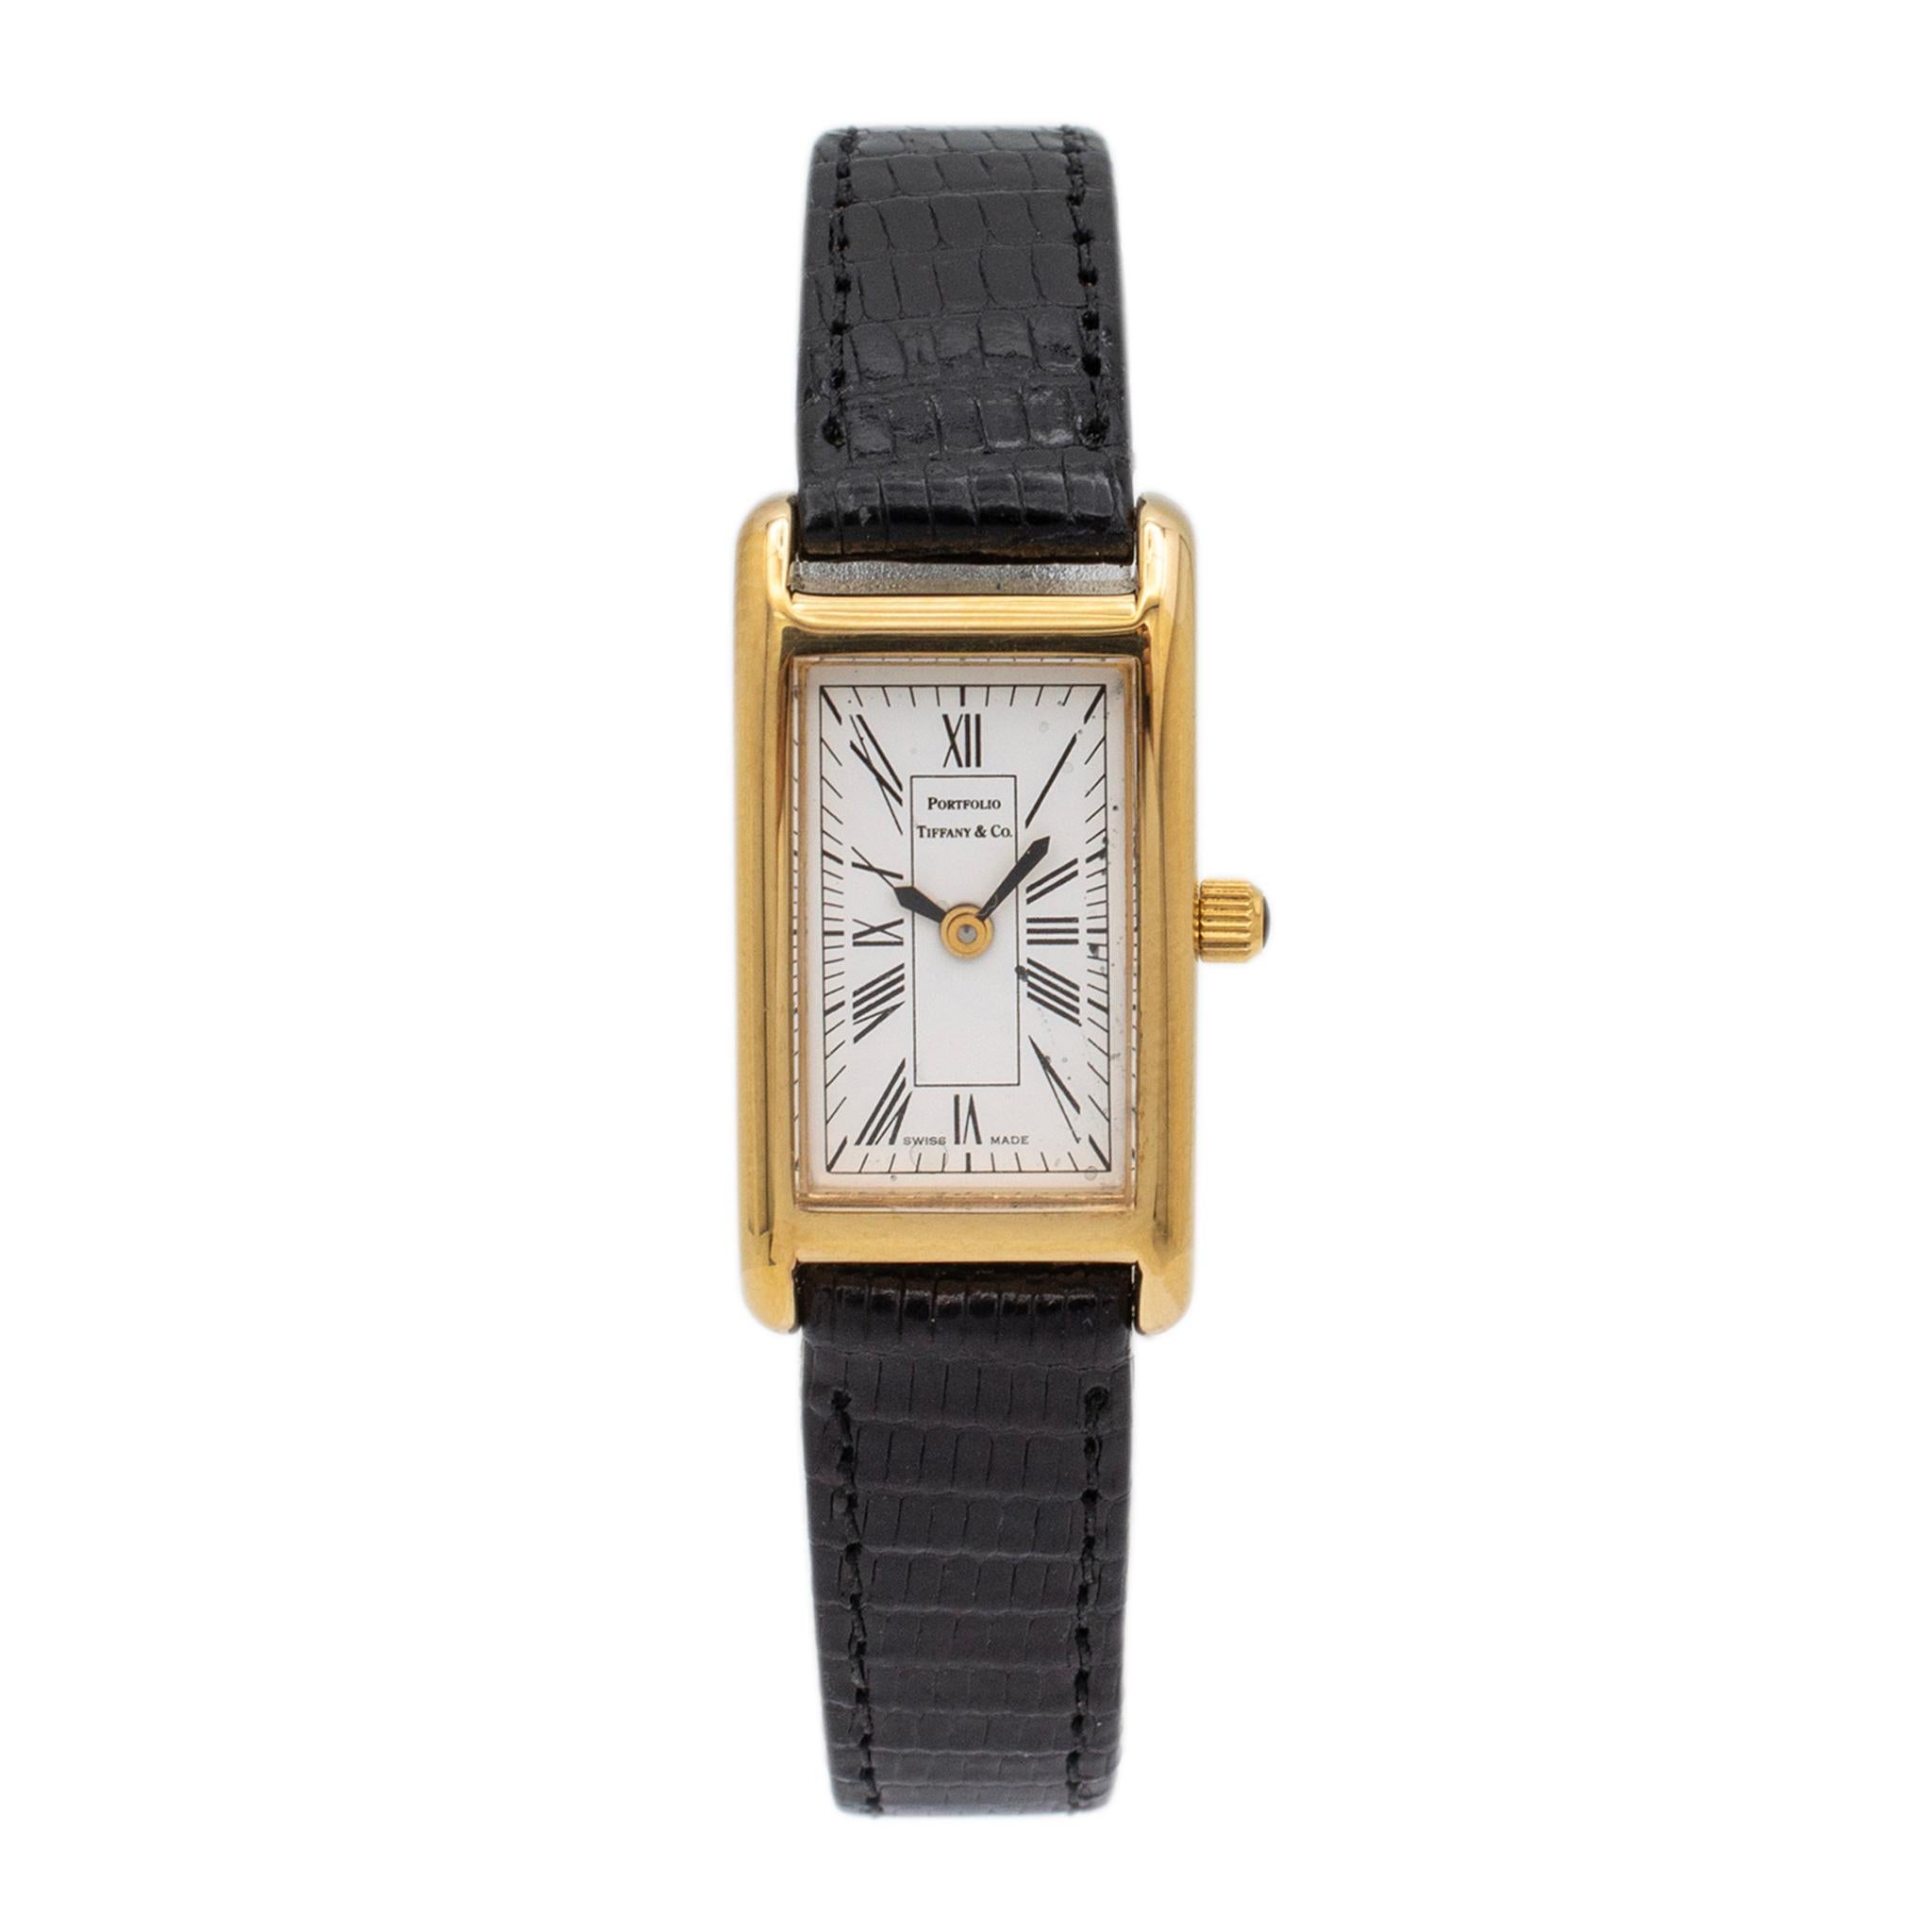 Brand: Tiffany & Co.

Gender: Ladies

Metal Type: 18K Gold Plated

Weight: 14.05 grams

Ladies Swiss made Tiffany & Co. gold plated watch with original box and papers. Engraved with 